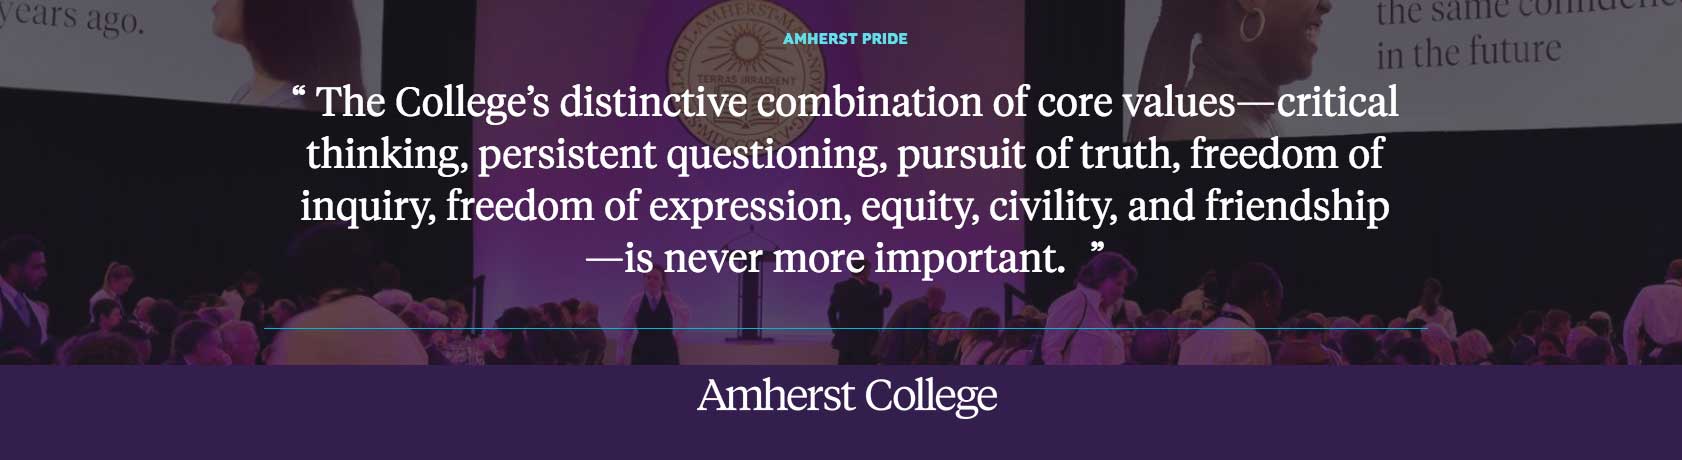 Quote from President Biddy Martin: "The College's distinctive combination of core values is never more important."